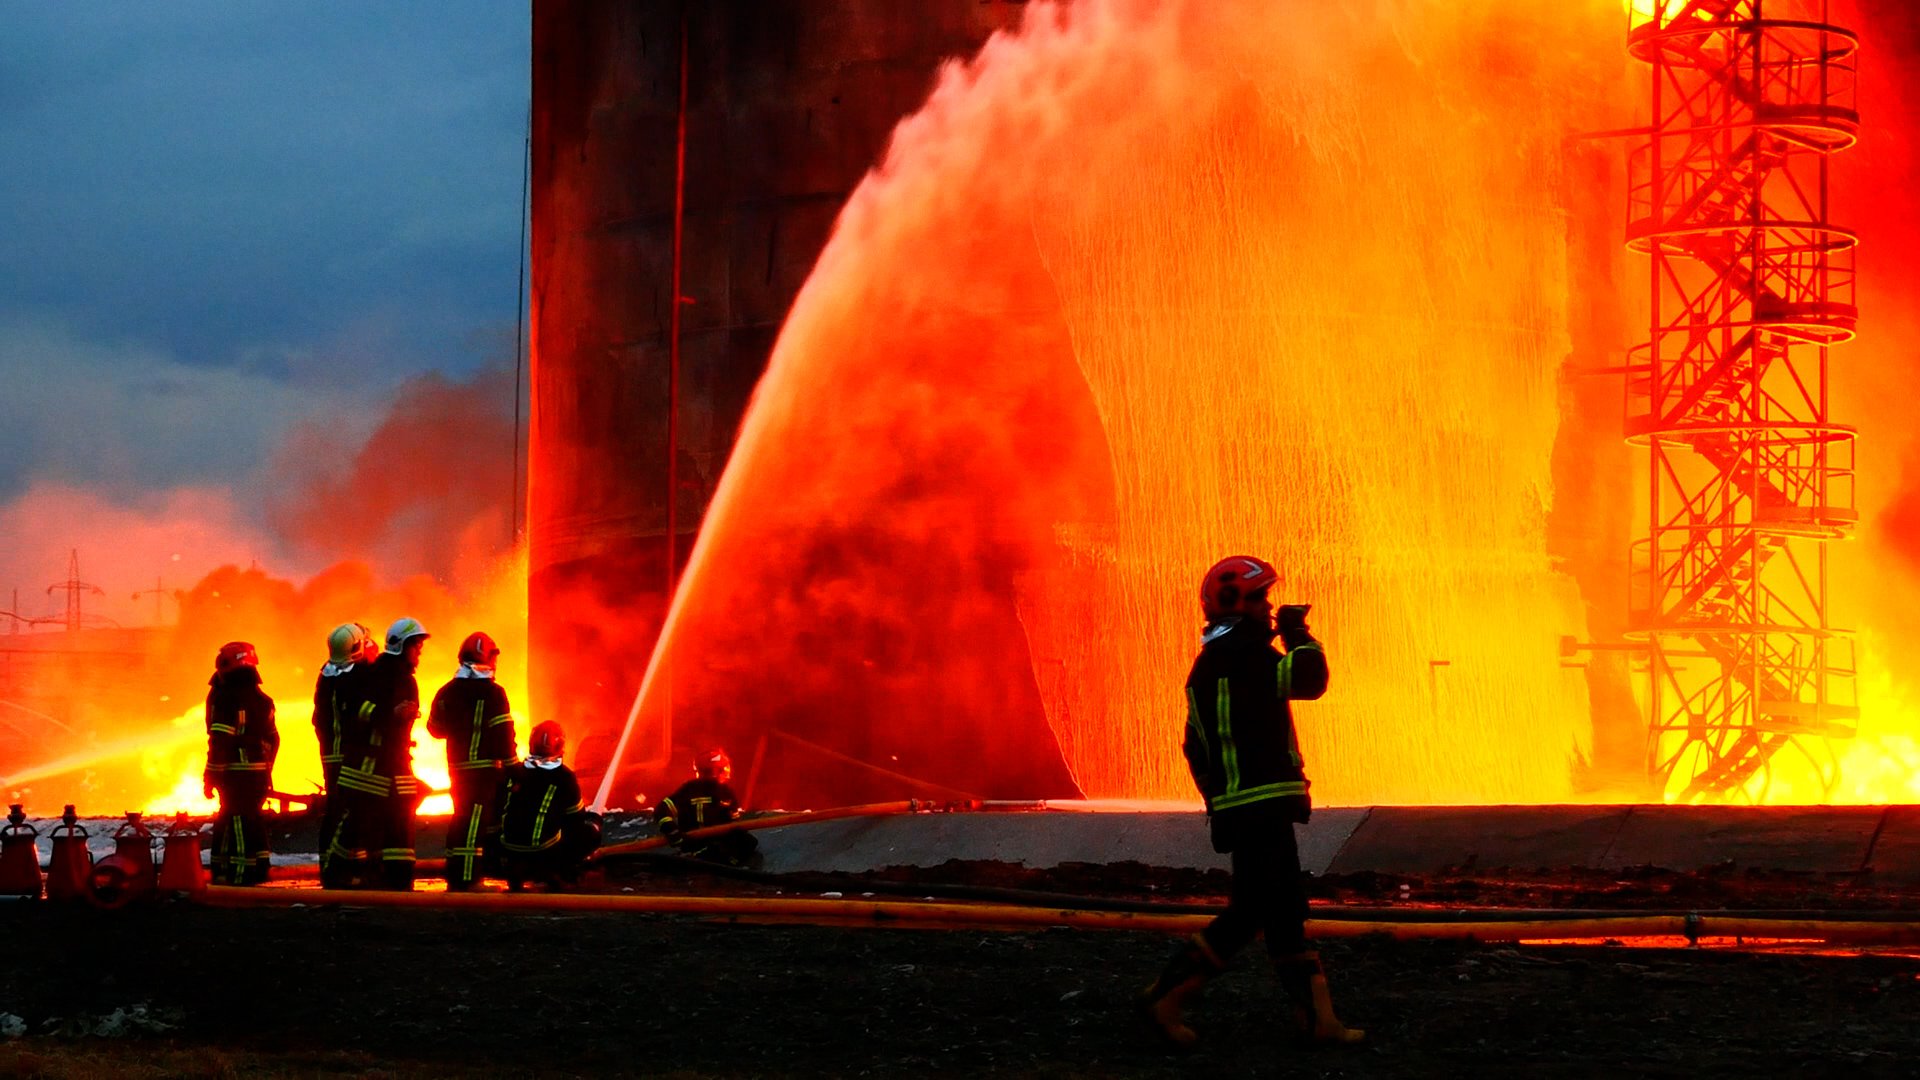 Firefighters try to extinguish the fire after Russian guided missiles hit a fuel storage facility in Lviv, Ukraine, on March 27.